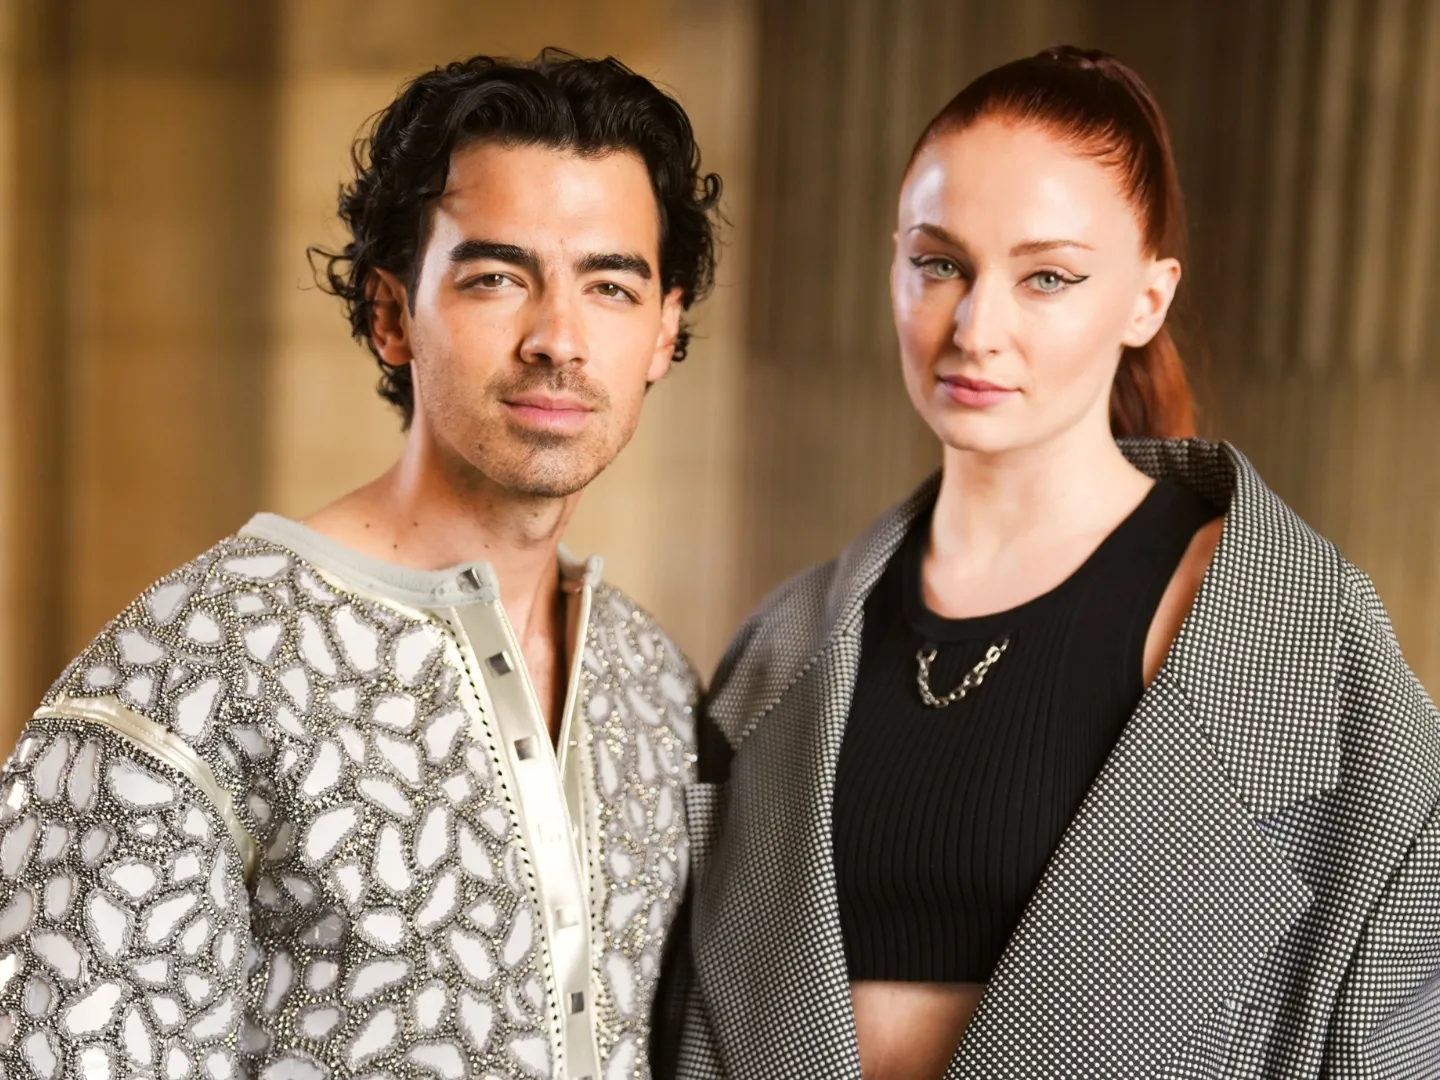 Jonas Family Assists Joe and Sophie Turner in Resolving Their Marriage Problems, but 'Nothing Worked,' According to Insider